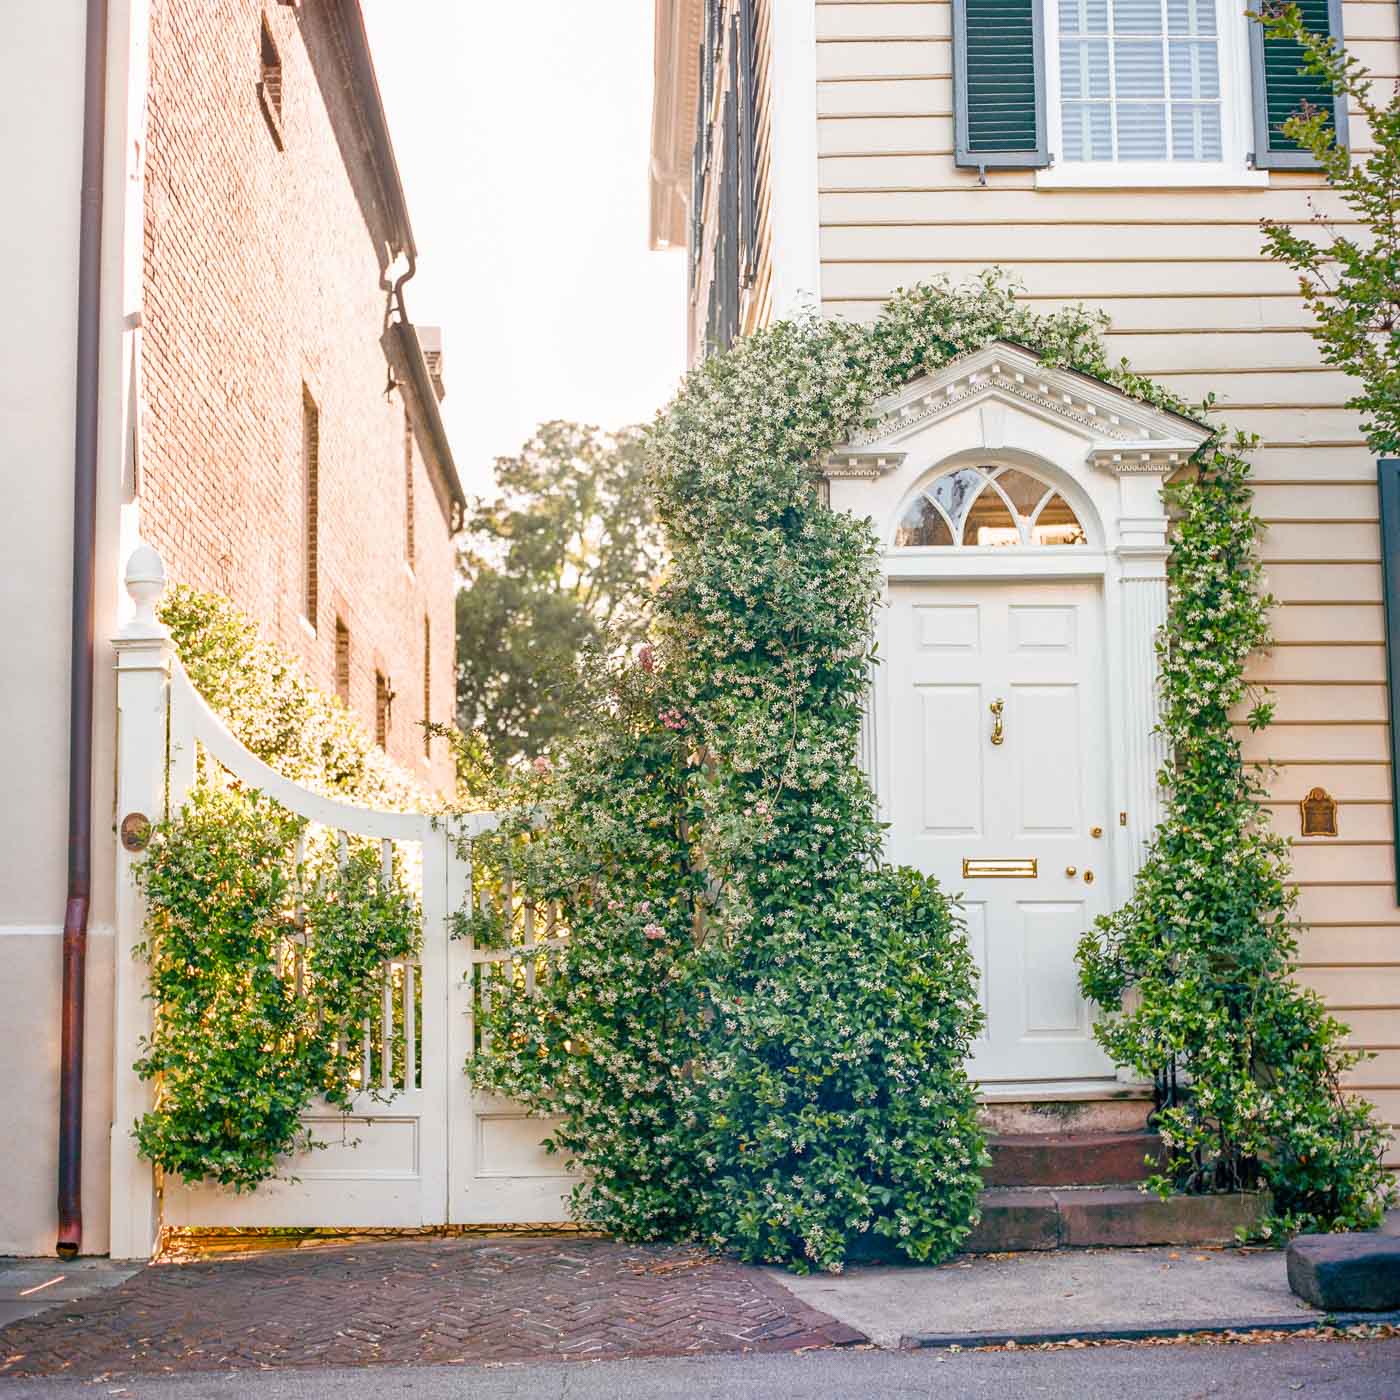 Film photograph of a historic Charleston South Carolina home covered in jasmine